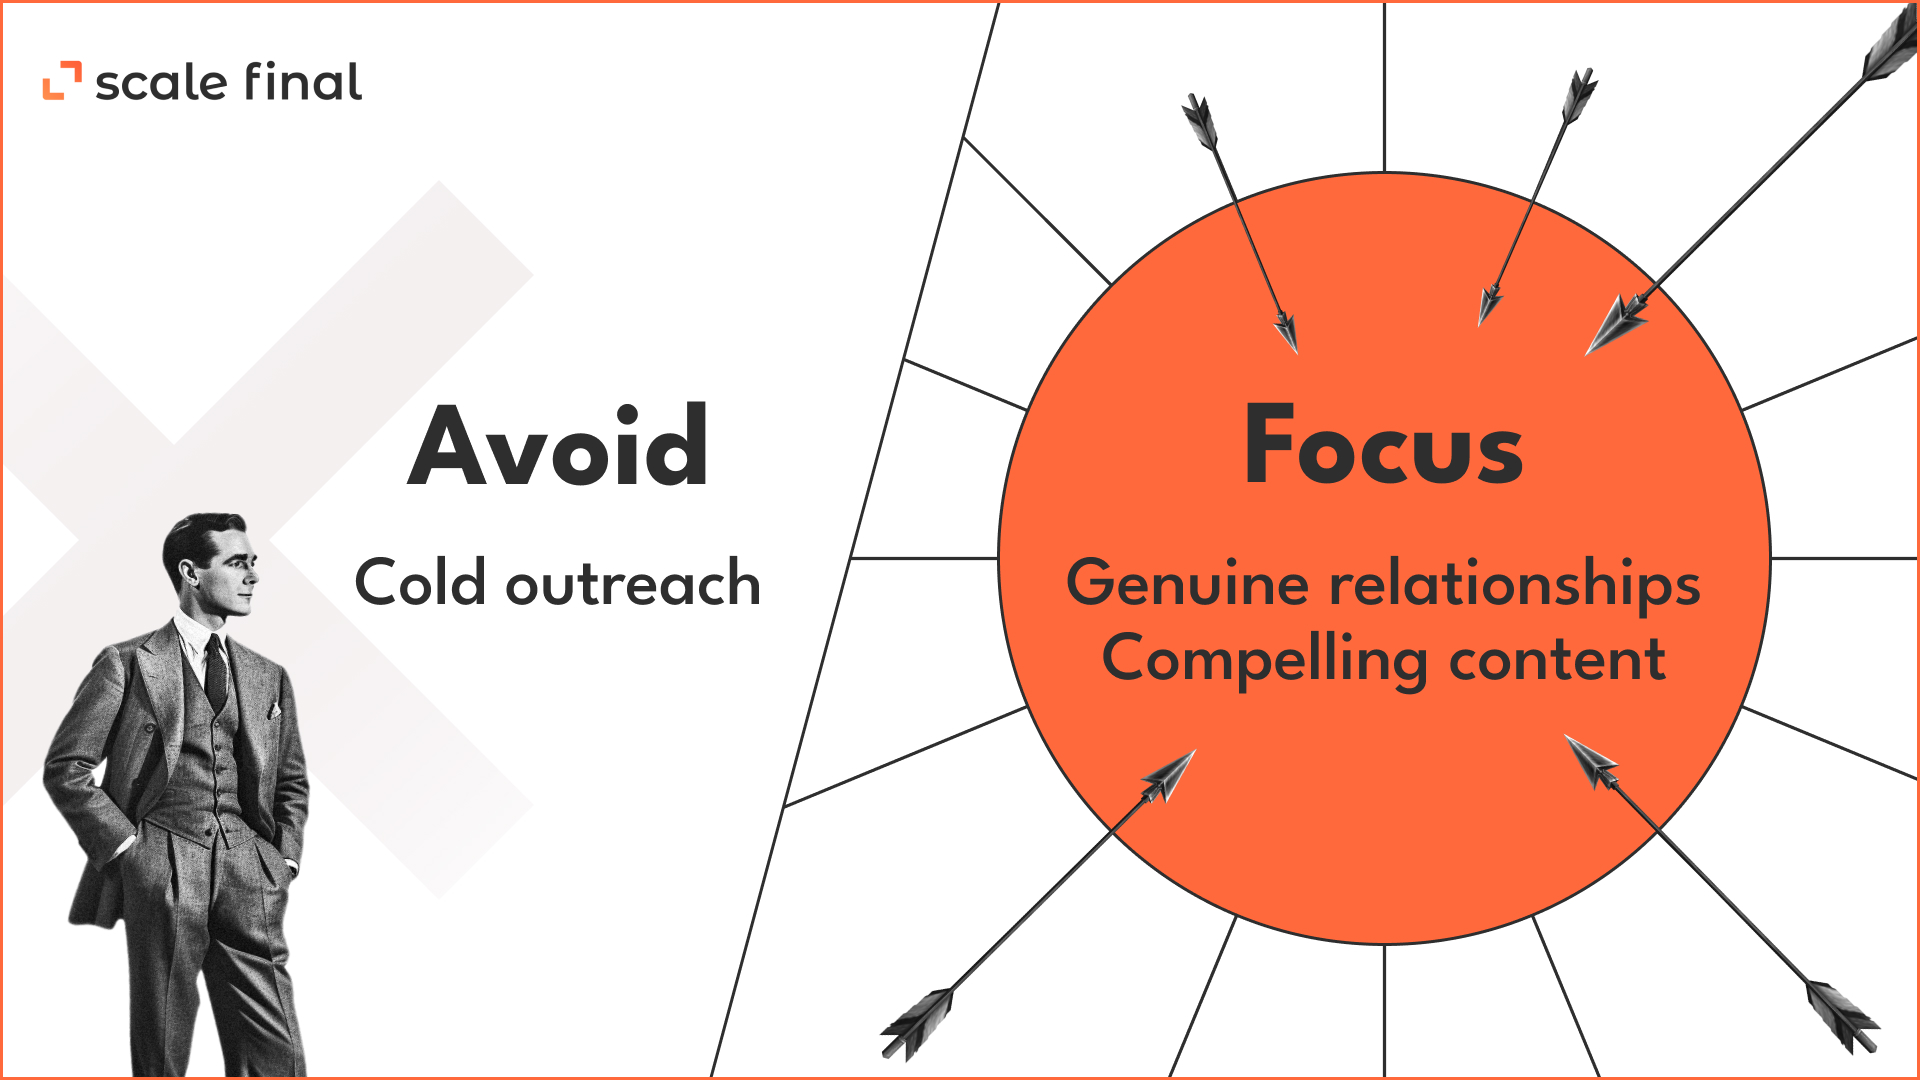 Avoid: cold outreachFocus: Genuine relationships Compelling content